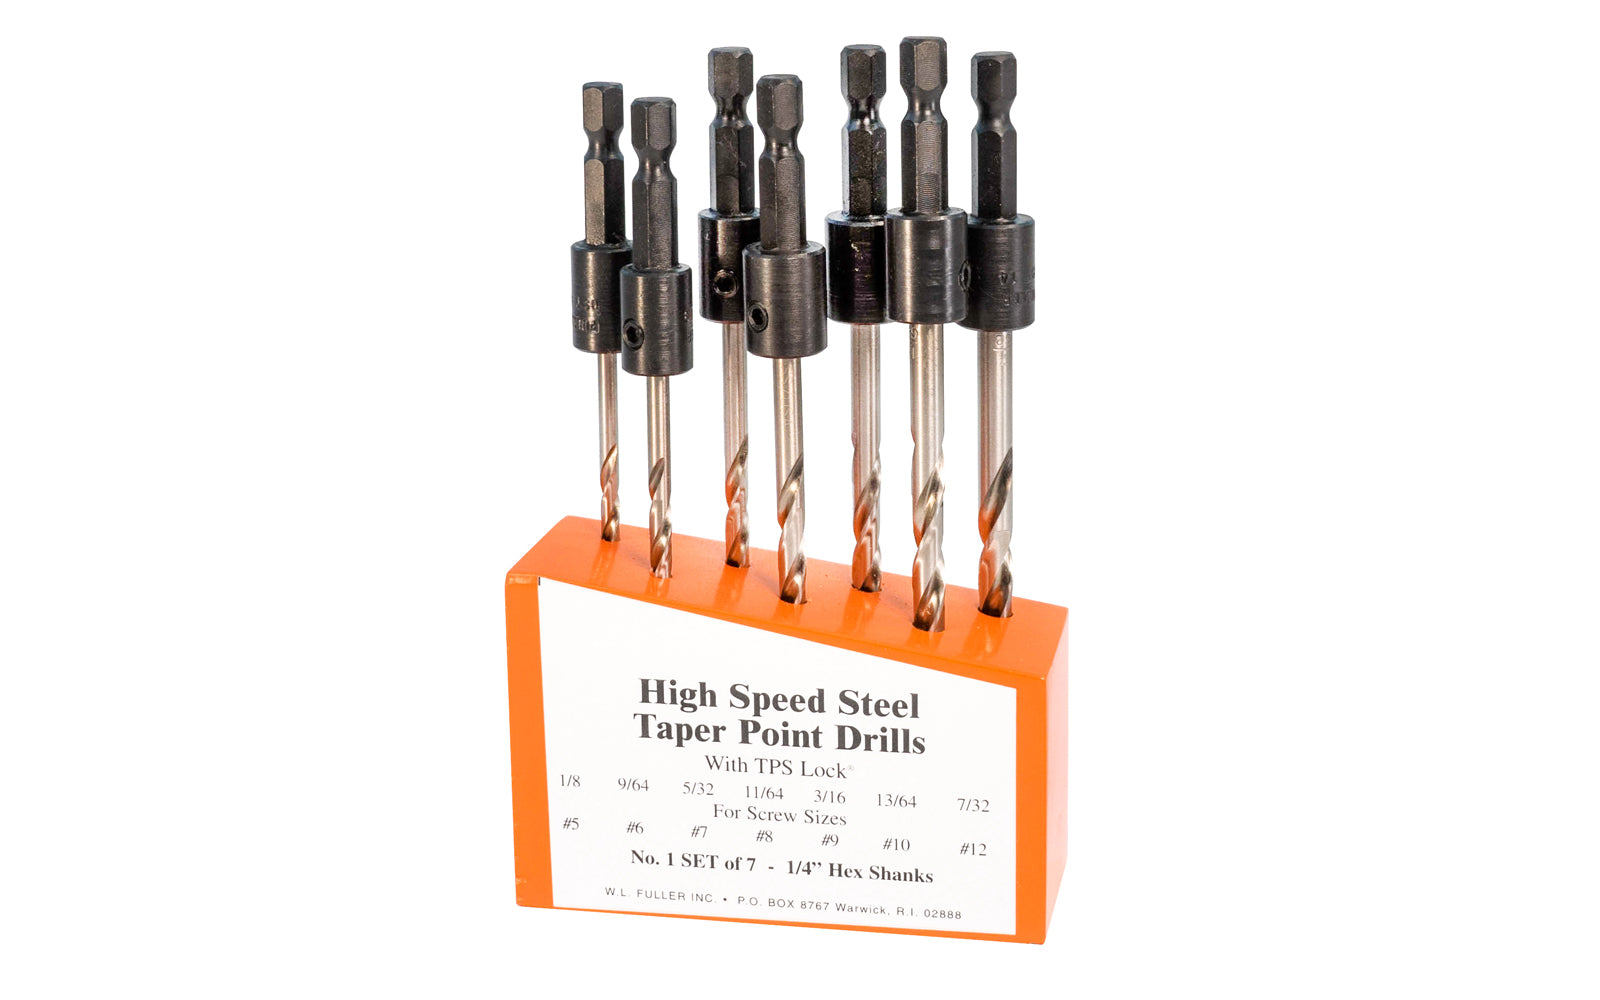 Made in USA · 7-piece HSS taper point bit set quick change - WL Fuller Drill Bit Set - Model No. 20149501 - Wood block holder - High speed steel ~ Sizes 1/8", 9/64", 5/32", 11/64", 3/16", 13/64", & 7/32" tapered drill bits ~ For hard & softwoods, & plastics ~ 1/4" ball hex shank quick change. 807200051357. TPS lock